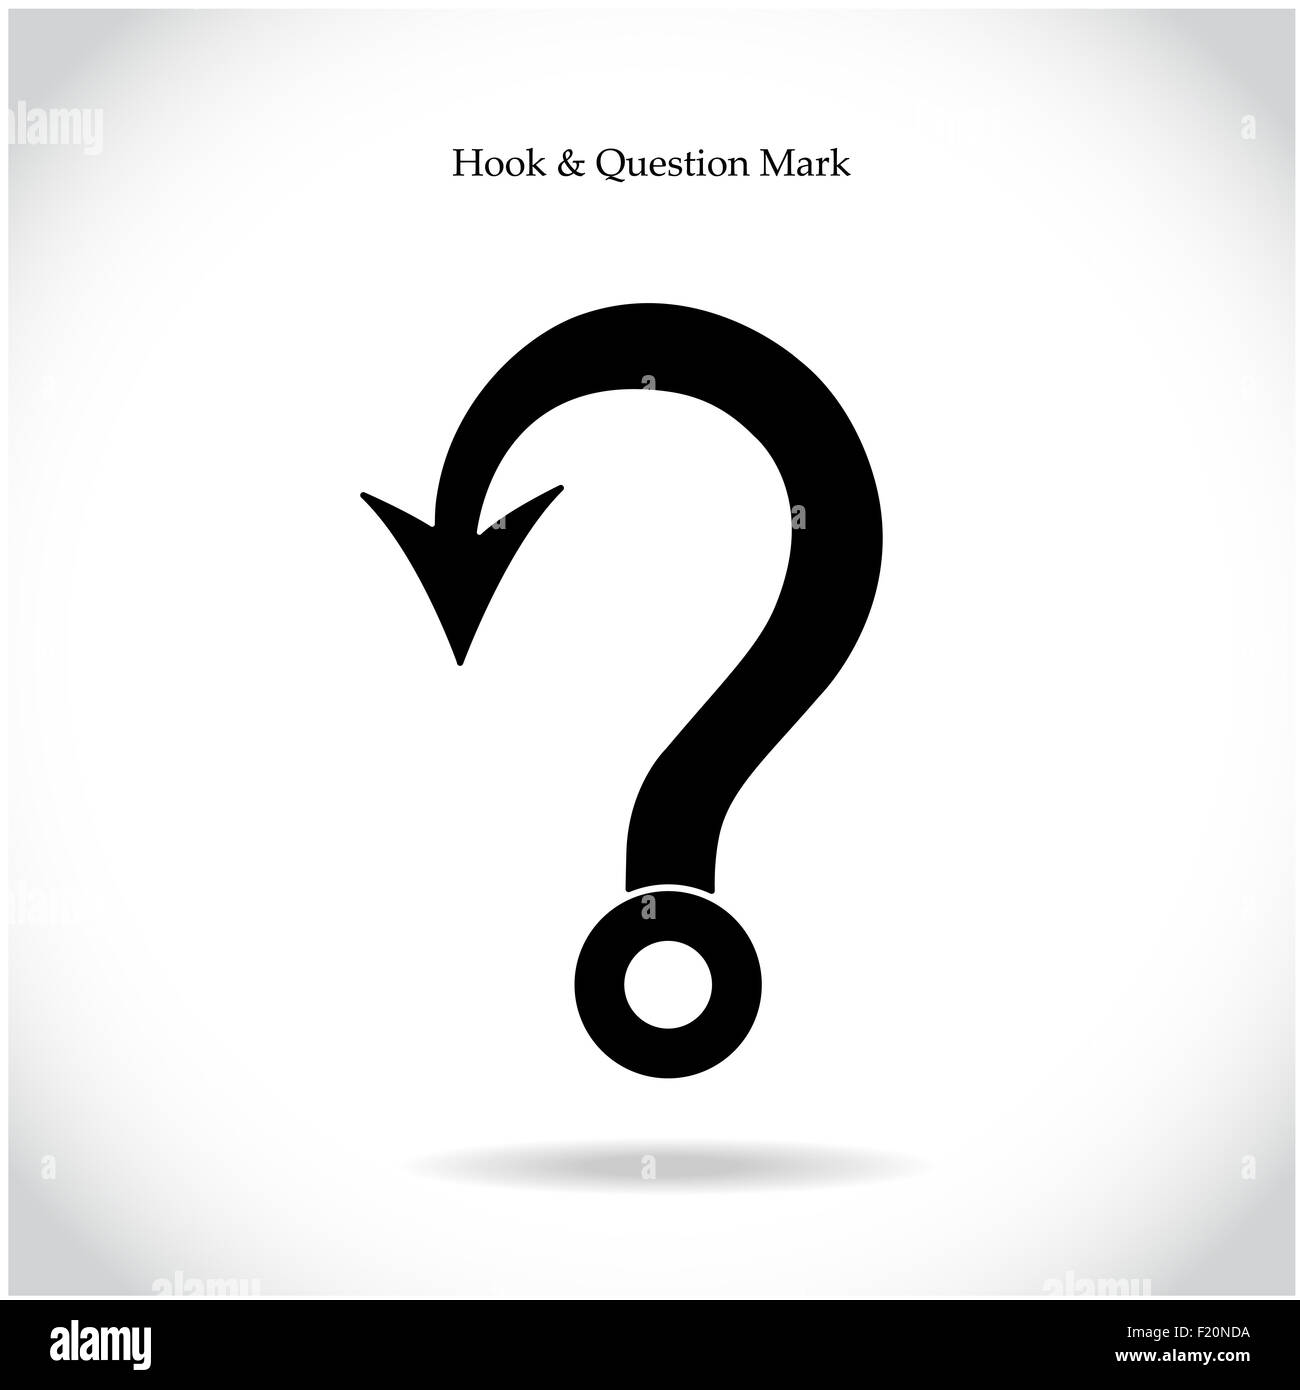 Fishing hook question mark sign on background. Education and business concept. Stock Photo